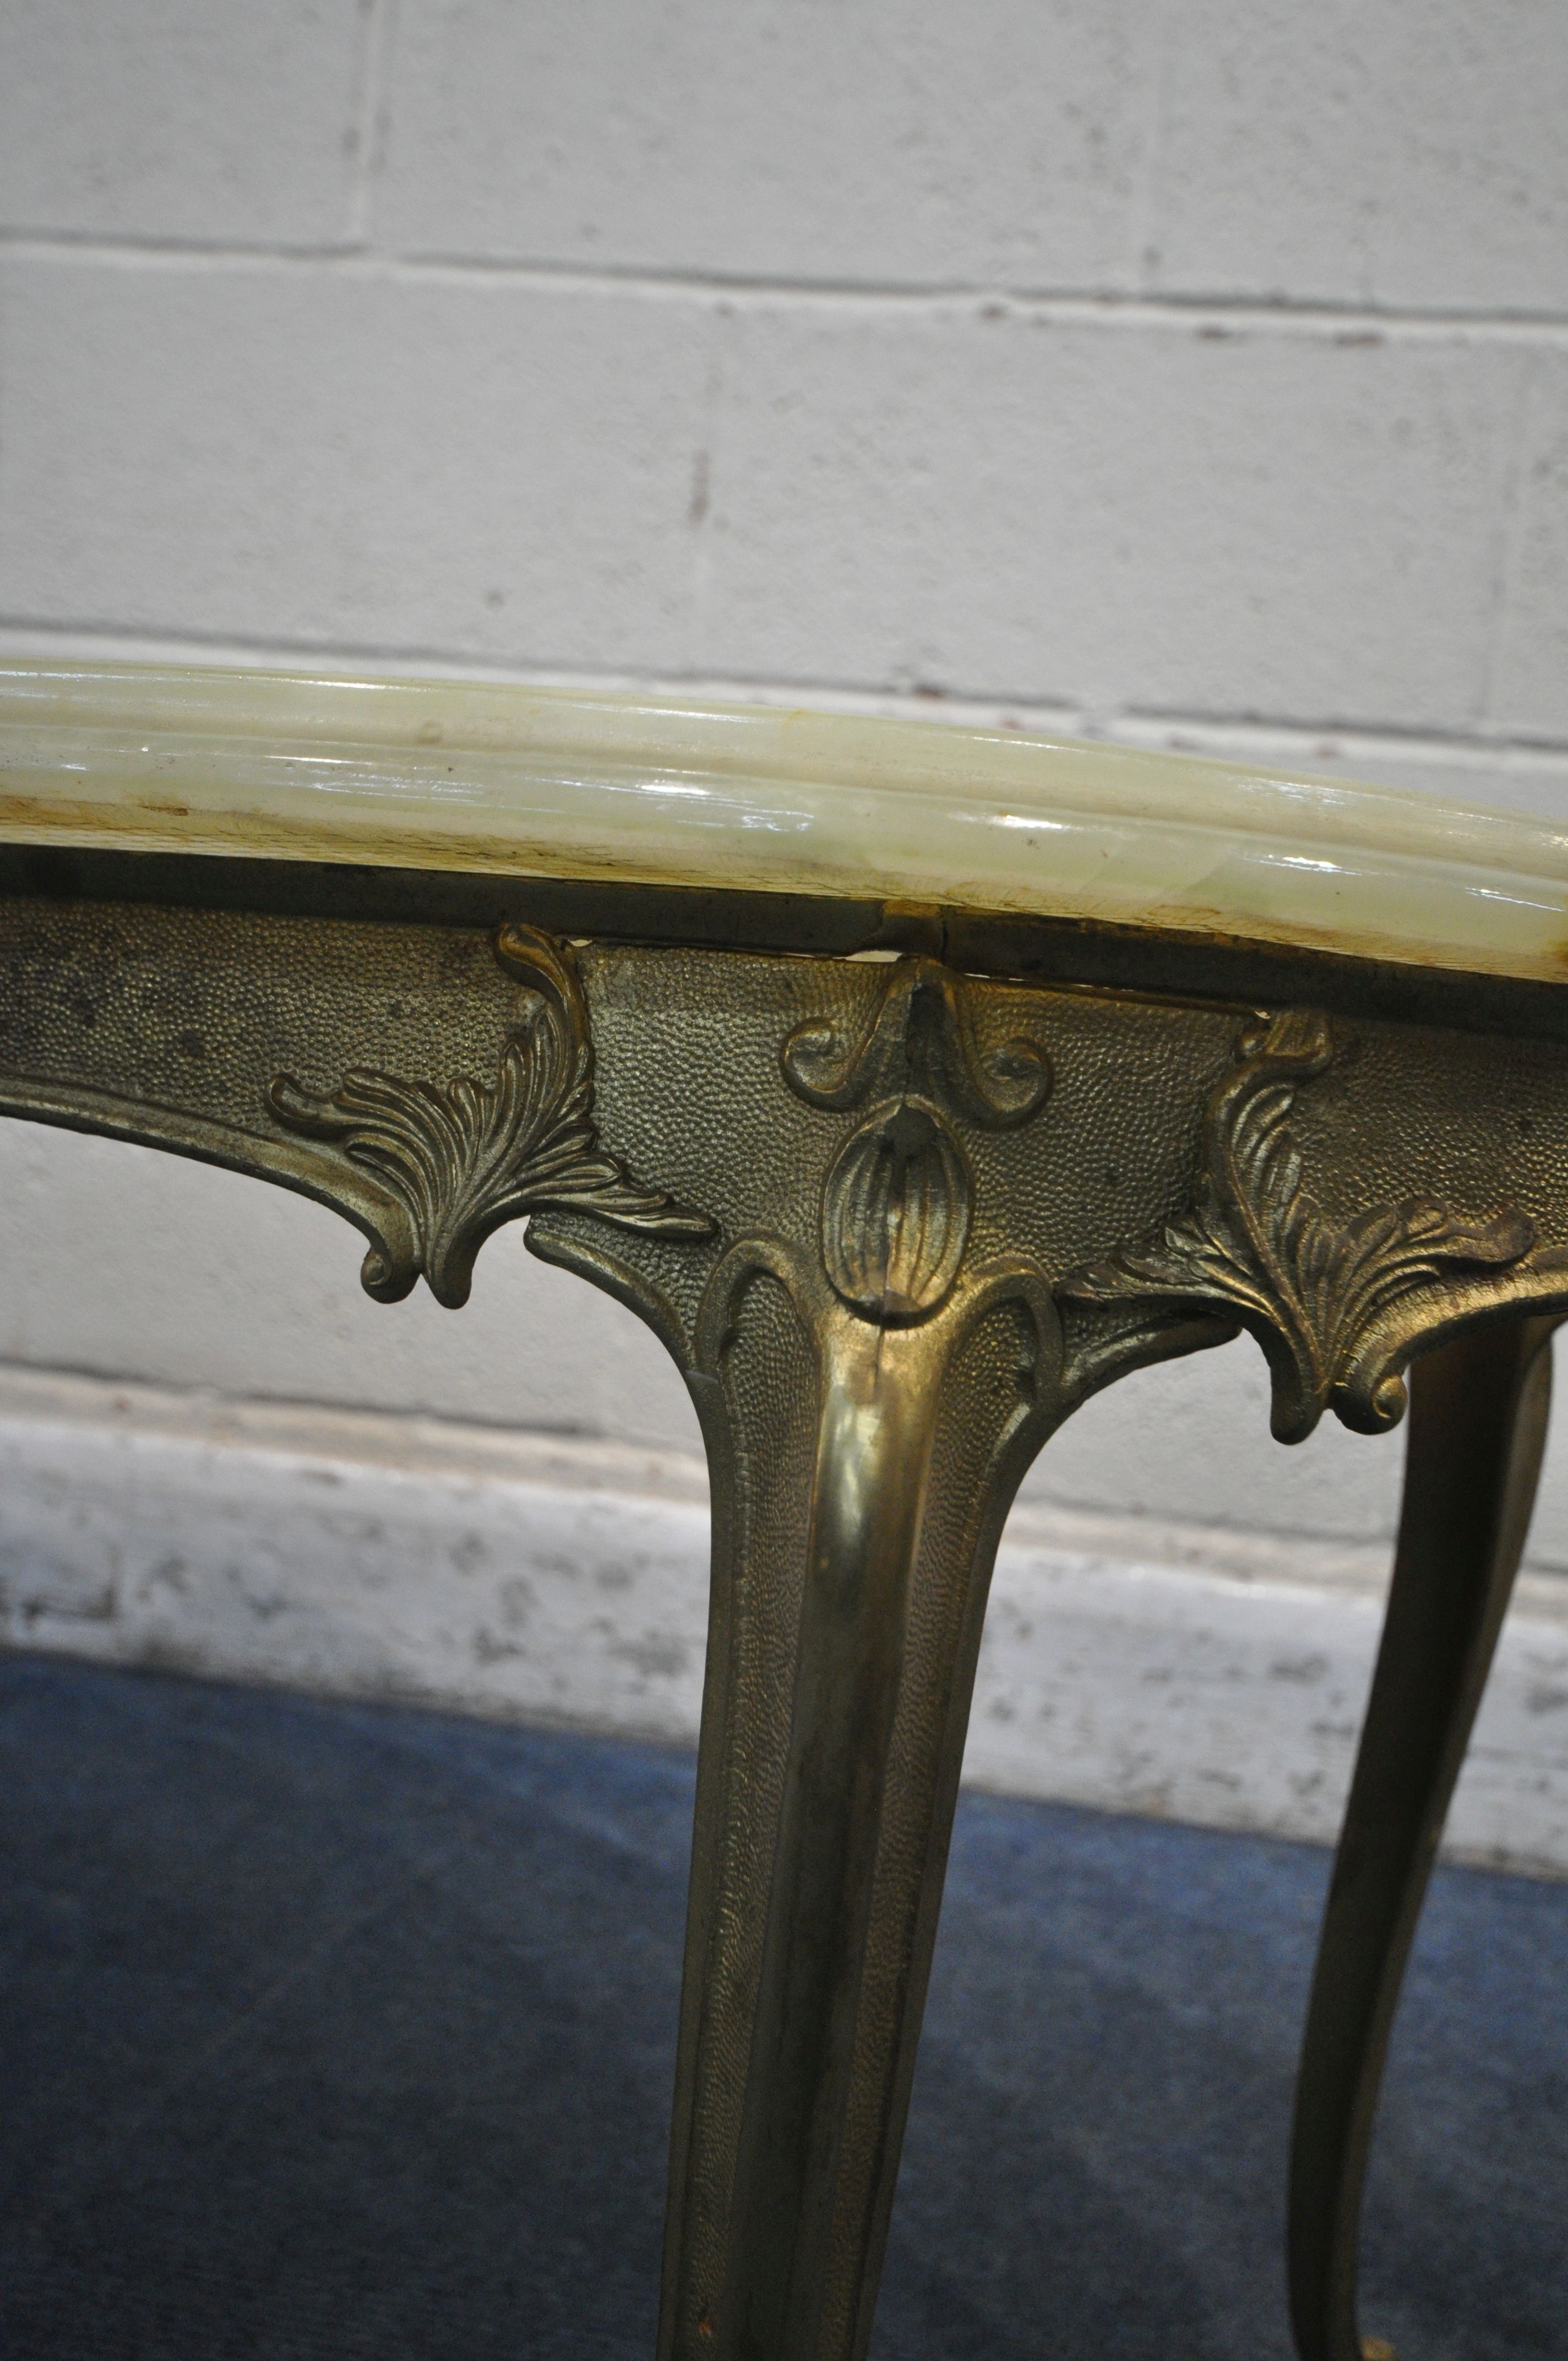 A PAIR OF ONYX AND BRASS OVAL COFFEE TABLES, bases with foliate detail on cabriole legs, length 98cm - Image 4 of 4